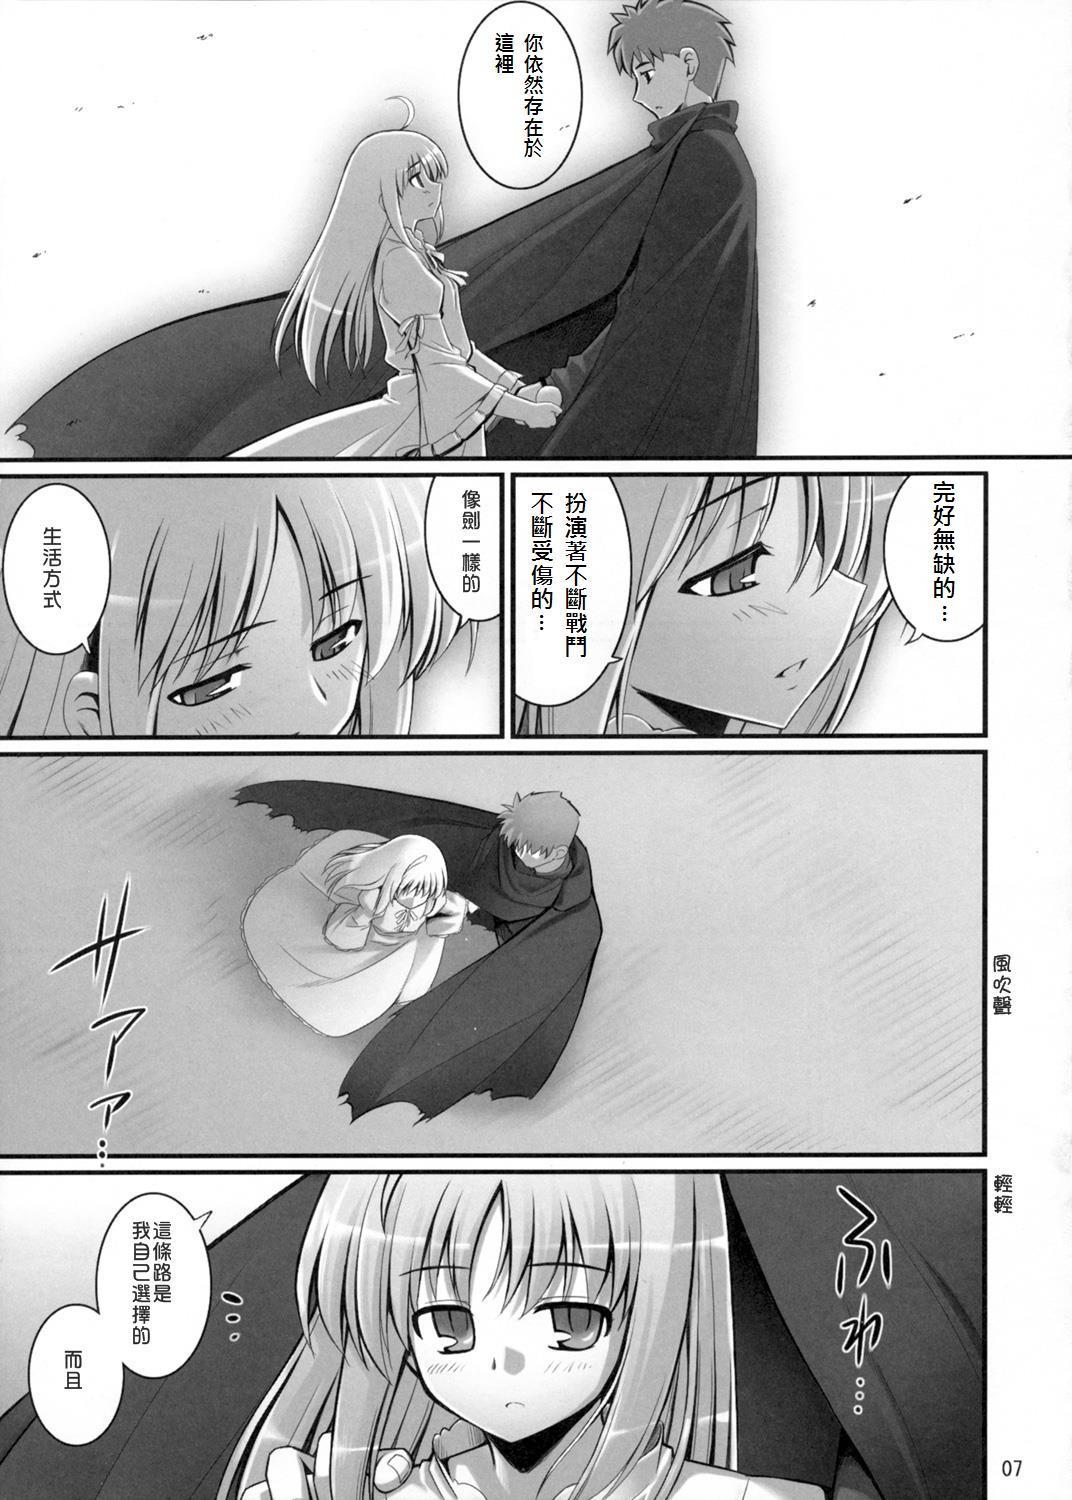 Argentino RE 06 - Fate stay night Analsex - Page 7